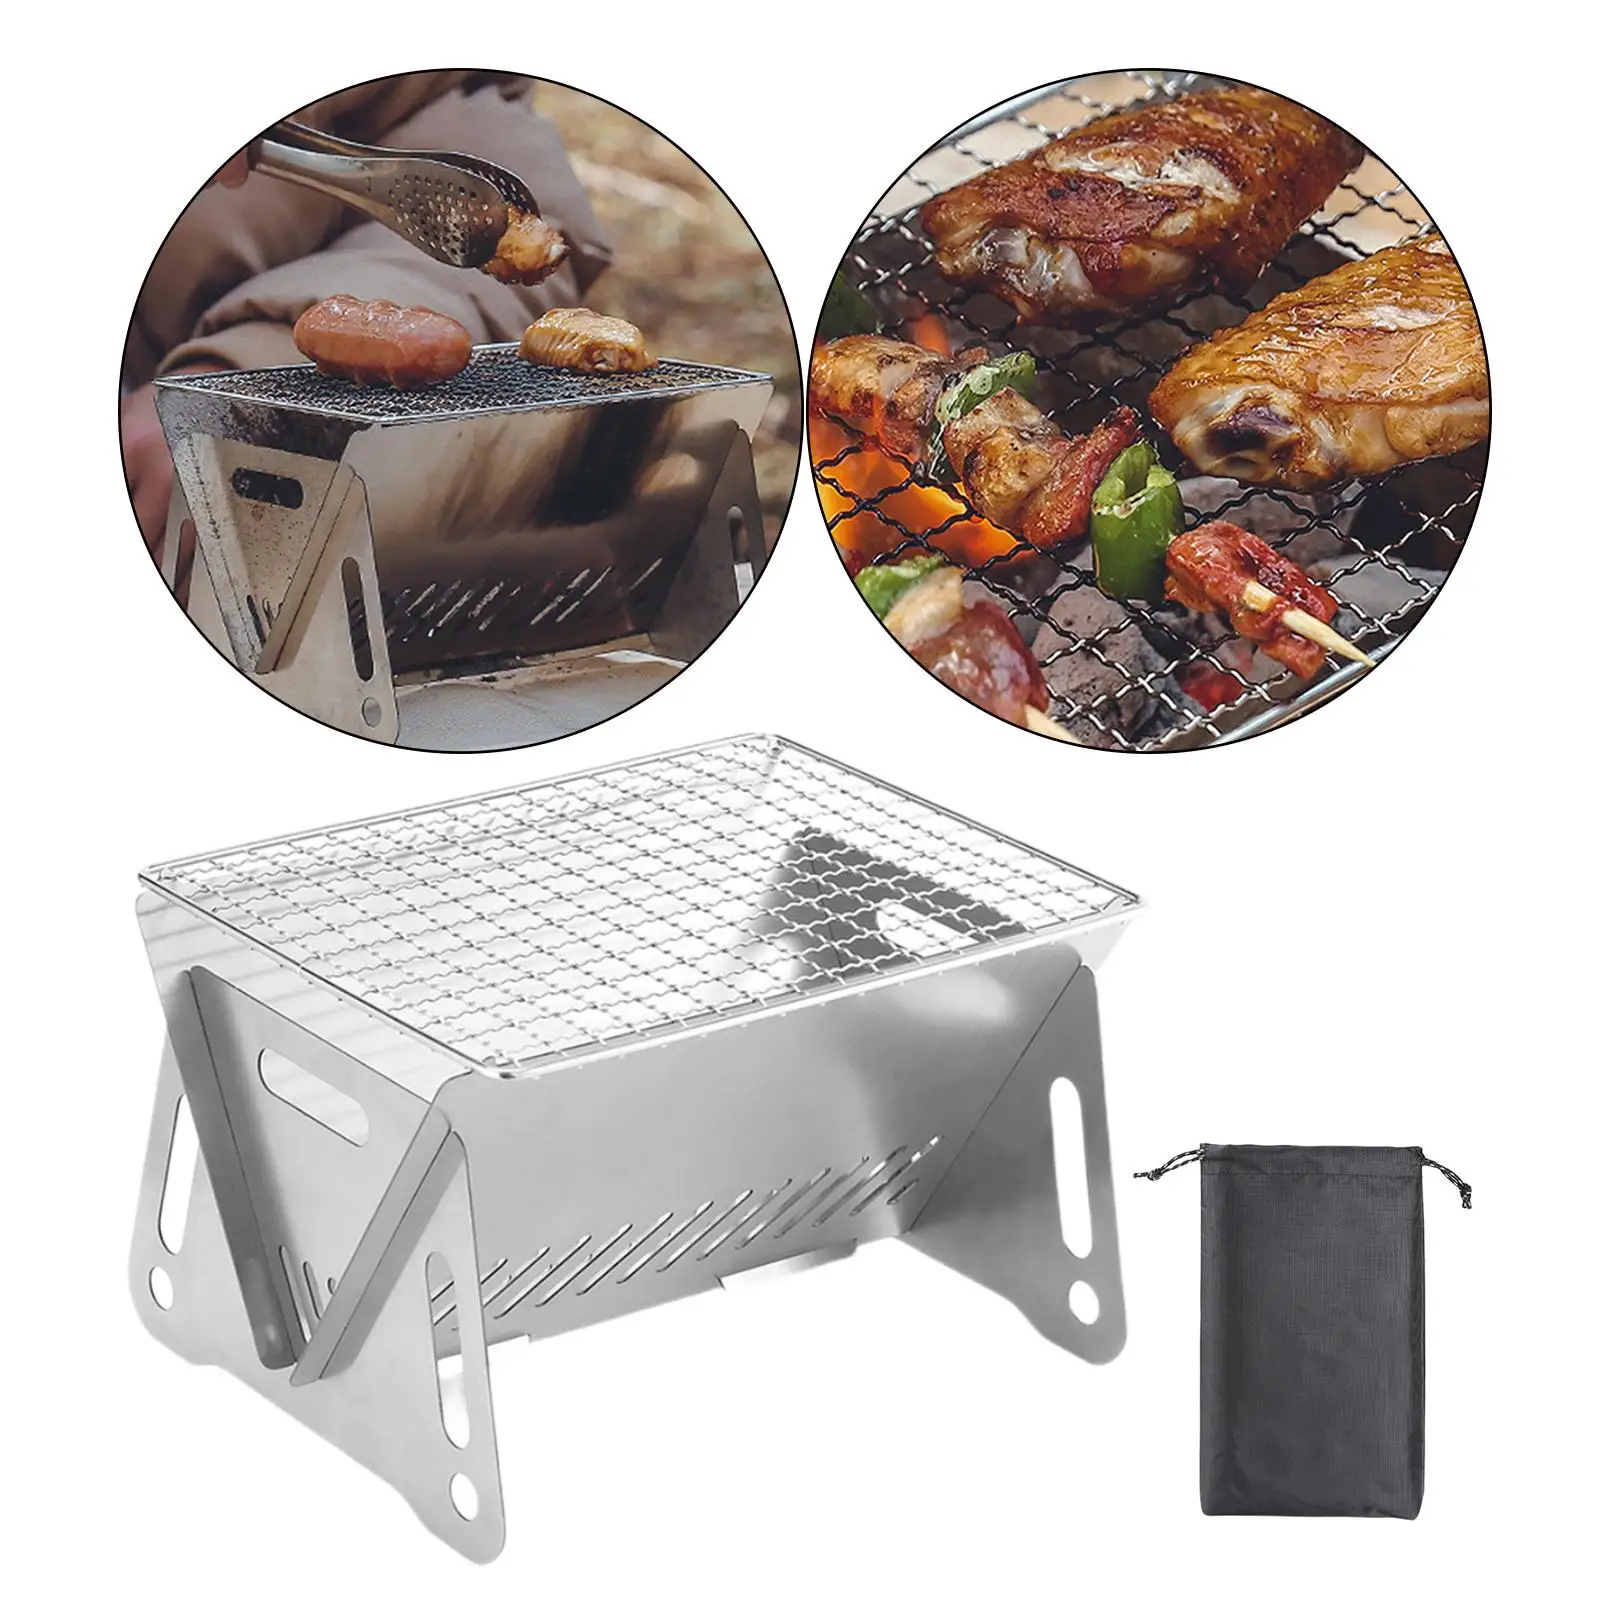 Foldable Grill Oven Stainless Steel Wood Oven Picnic Grill Accessories